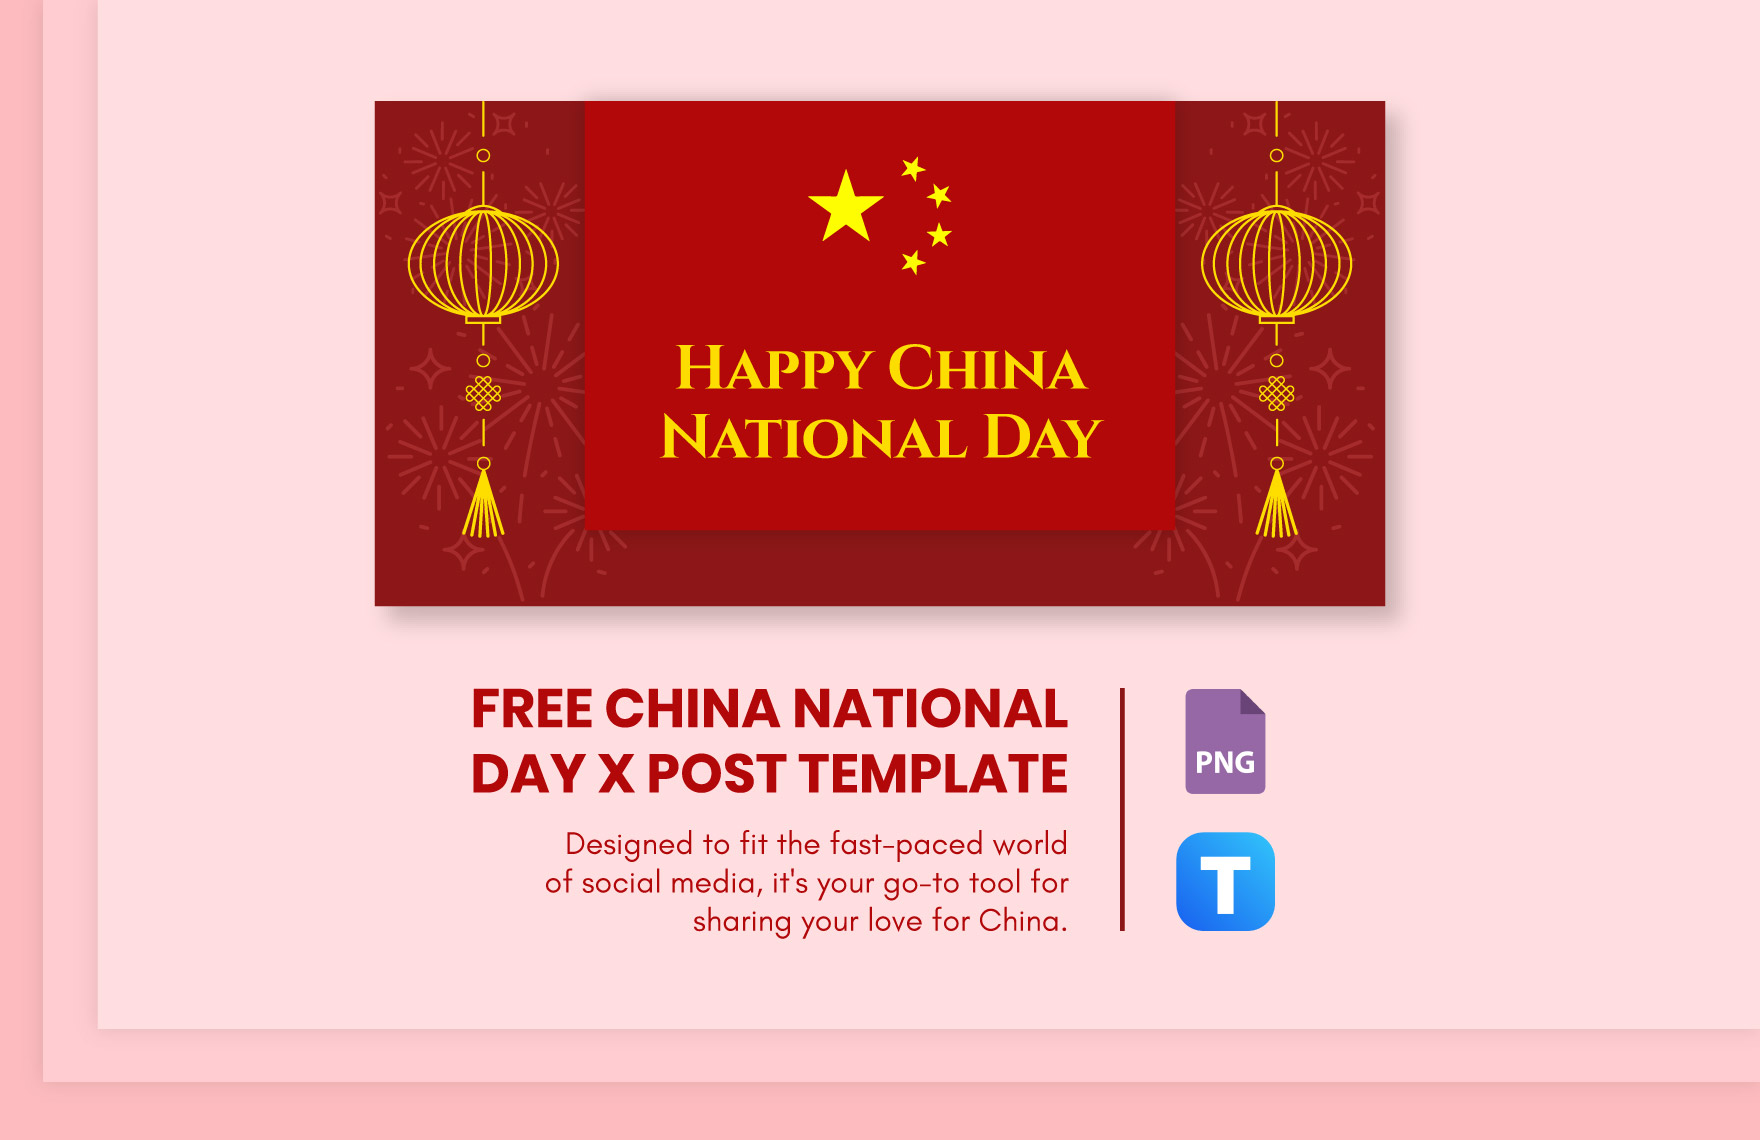 Free China National Day X Post Template in PNG